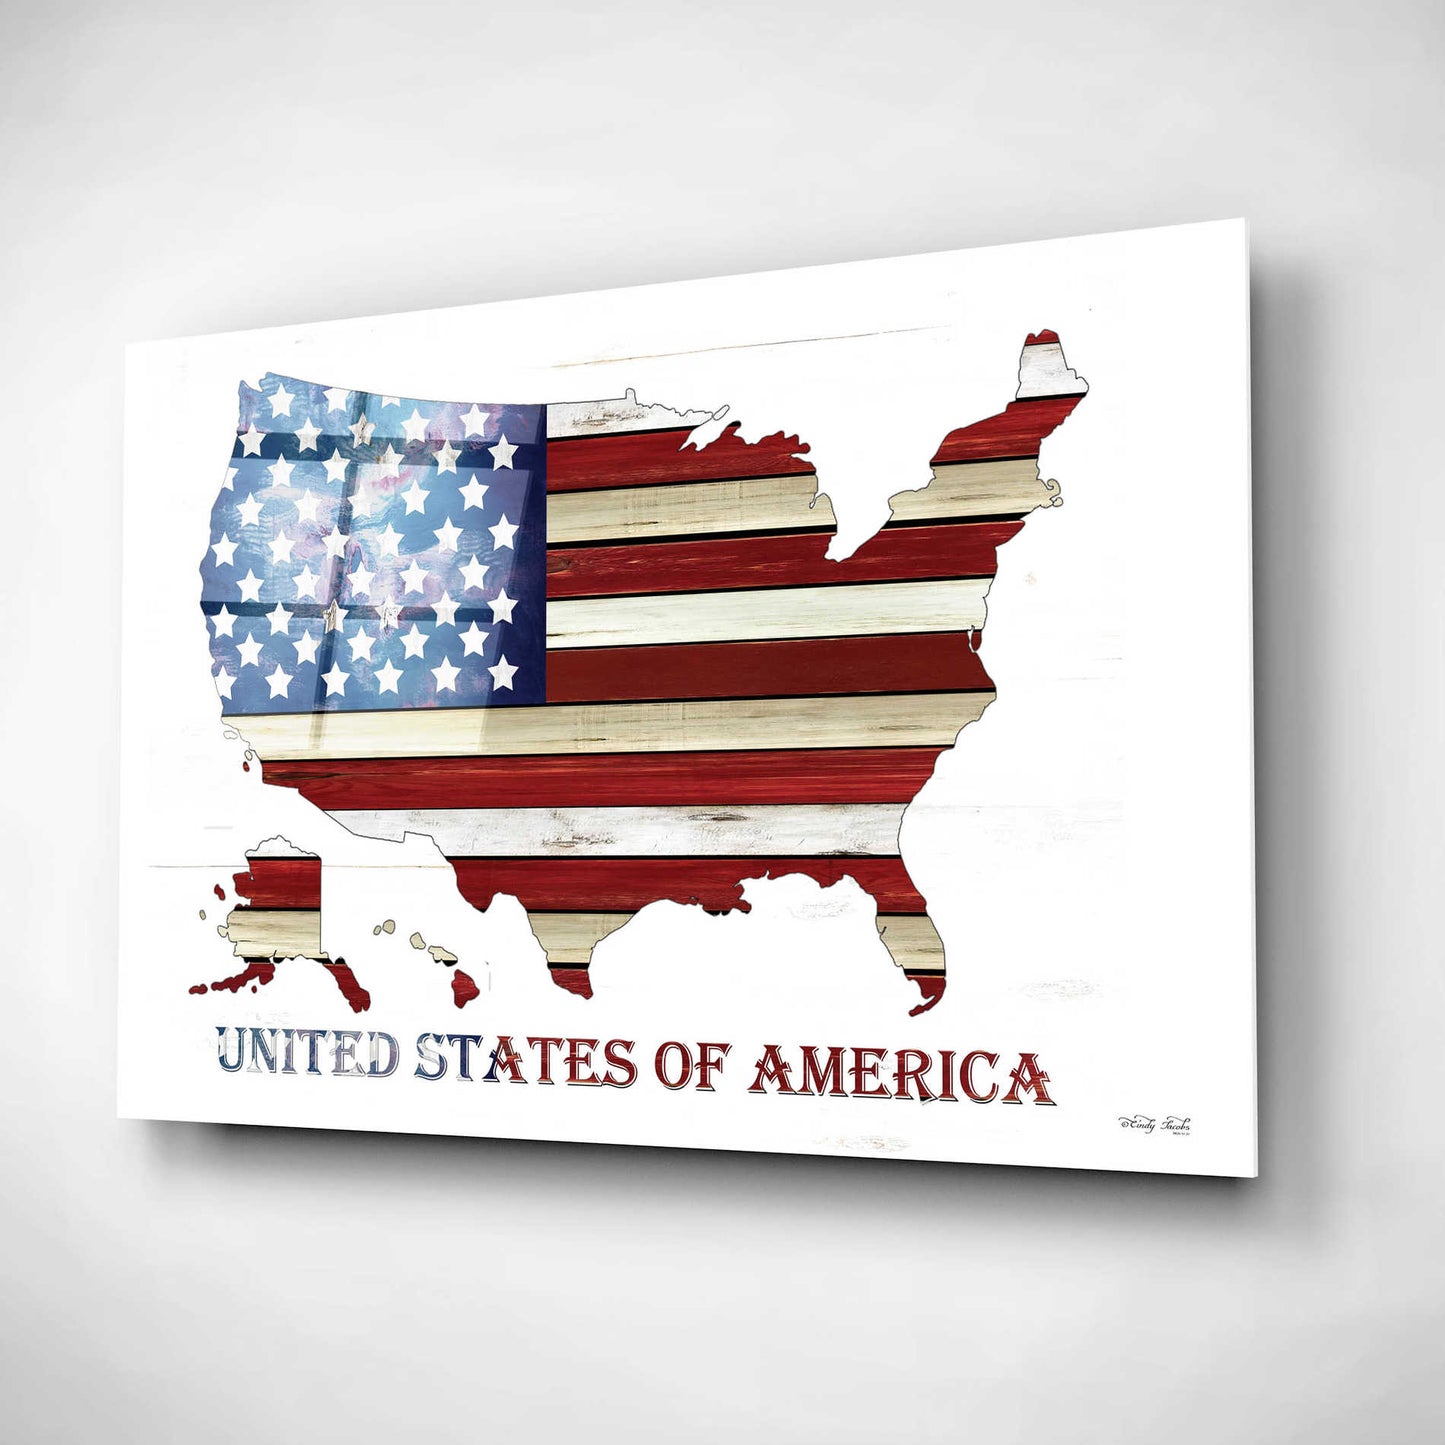 Epic Art 'United States of America' by Cindy Jacobs, Acrylic Glass Wall Art,24x16